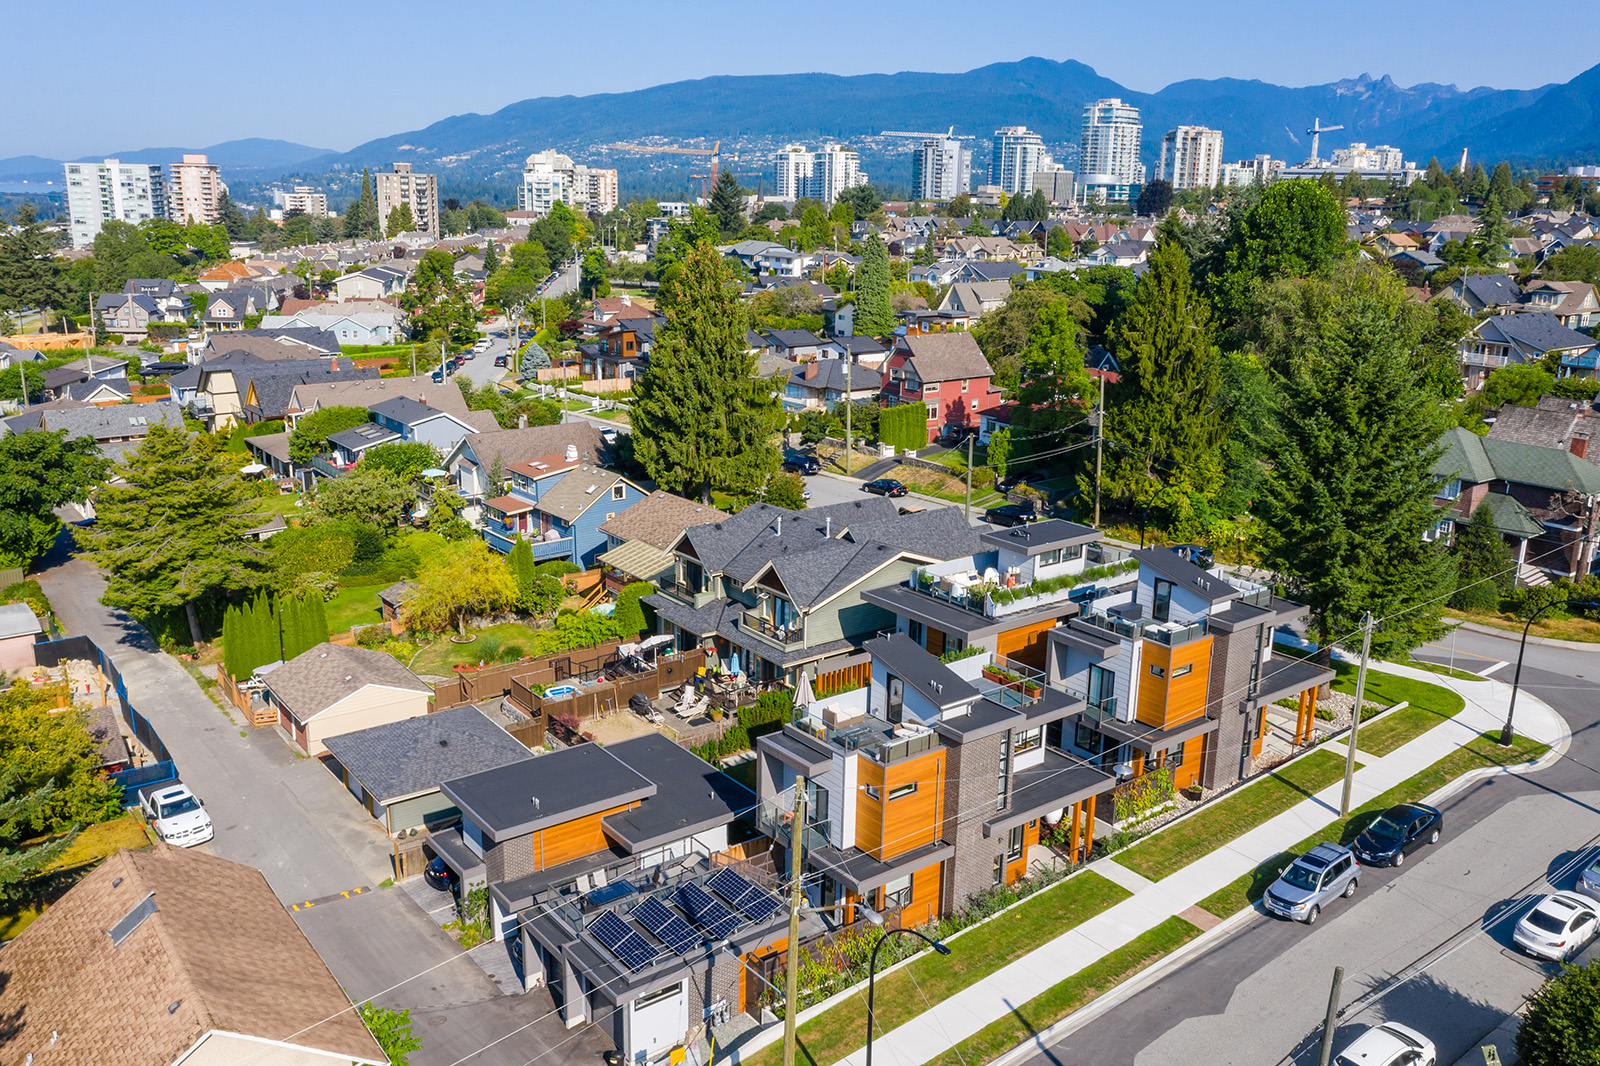 Aerial view showing a diverse mix of homes in the Vancouver area